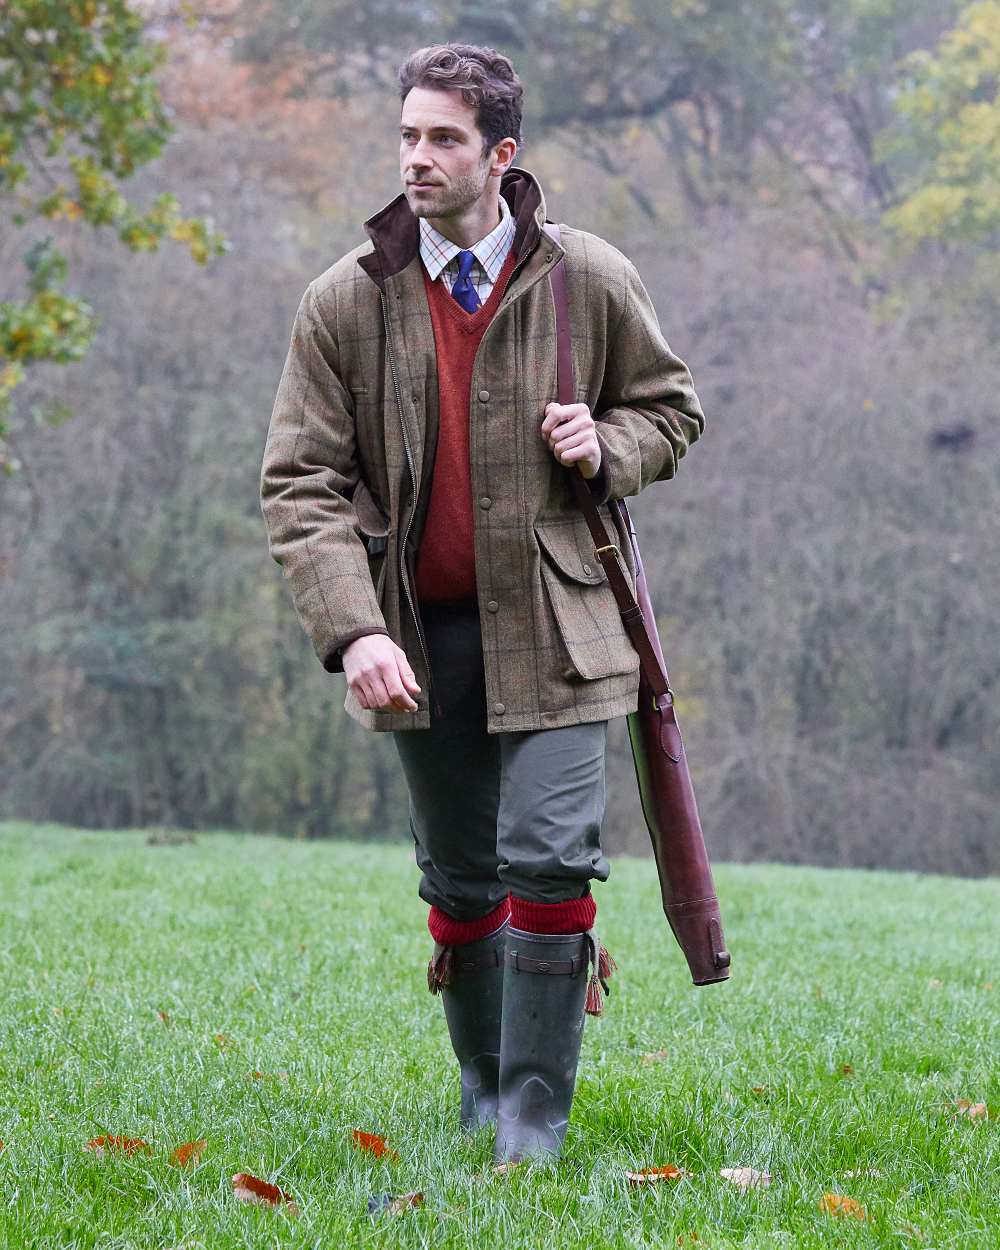 Alan Paine Mens Combrook Field Coat in Thyme 